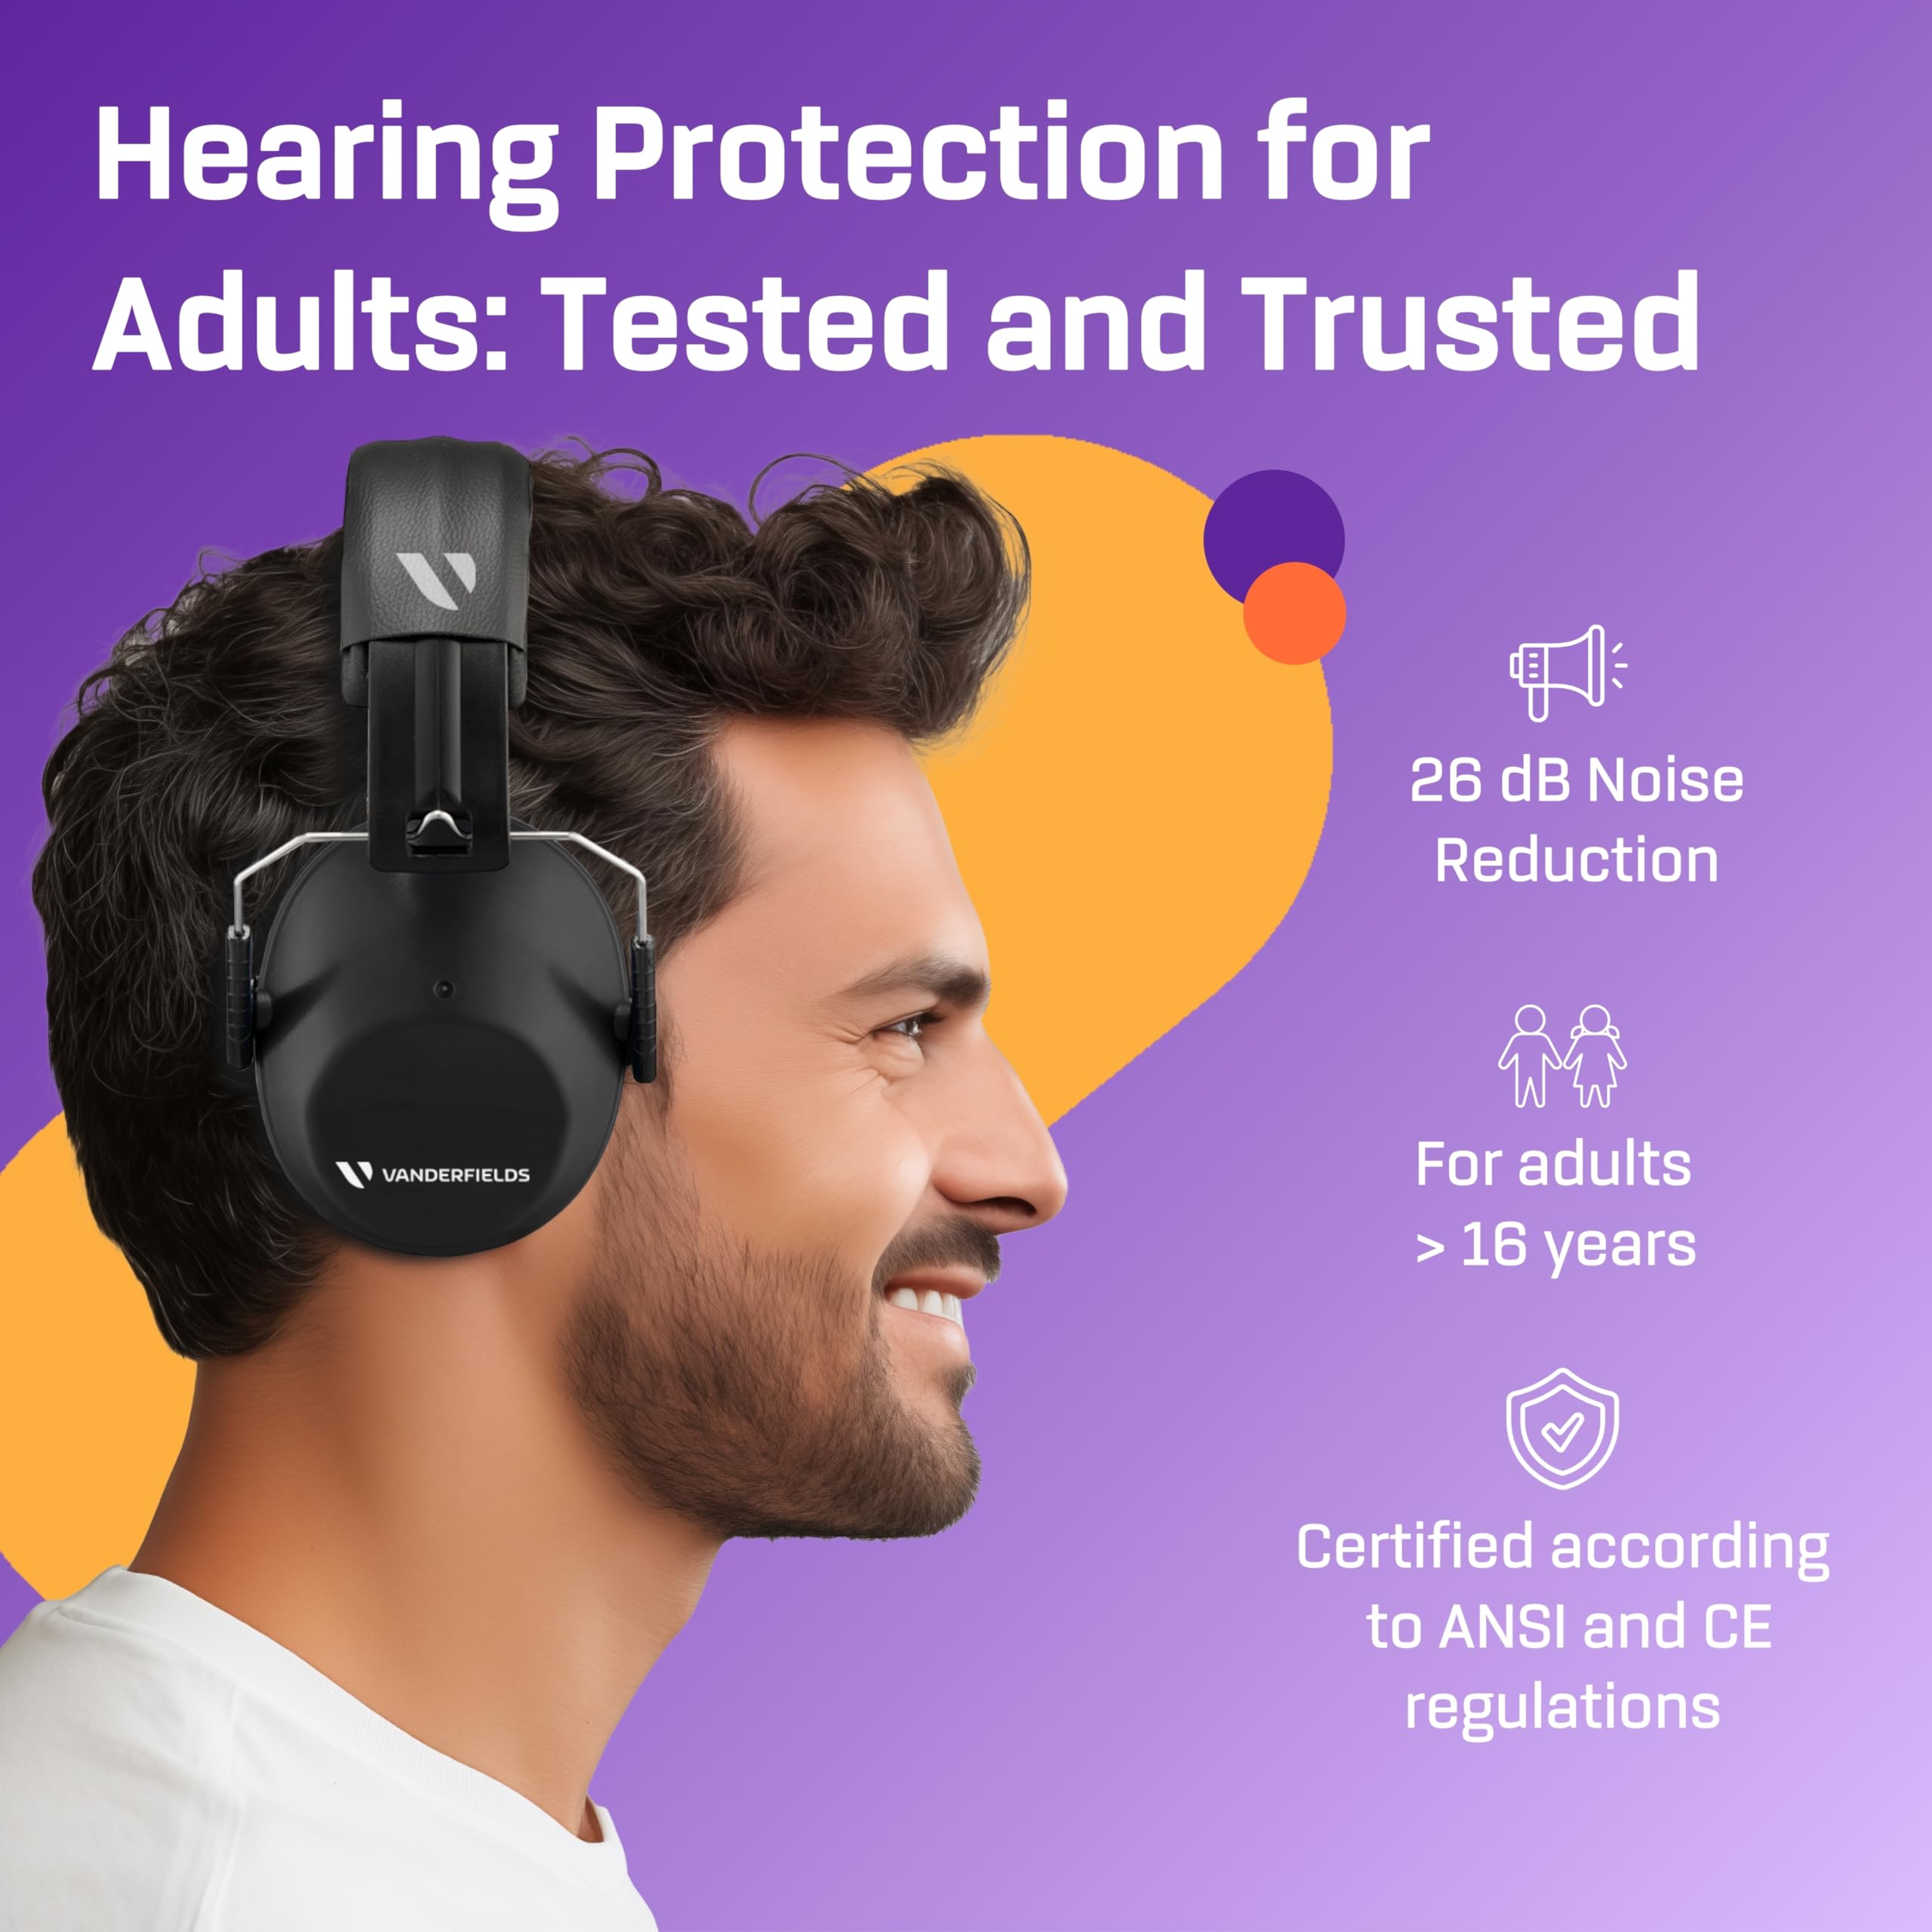 VANDERFIELDS Hearing Protection Ear Muffs for Noise Reduction, 26dB Certified, Noise Cancelling Safety Ear Protection for Shooting, Adult Headphones for Lawn Mowing, DIY, Construction, Woodworking